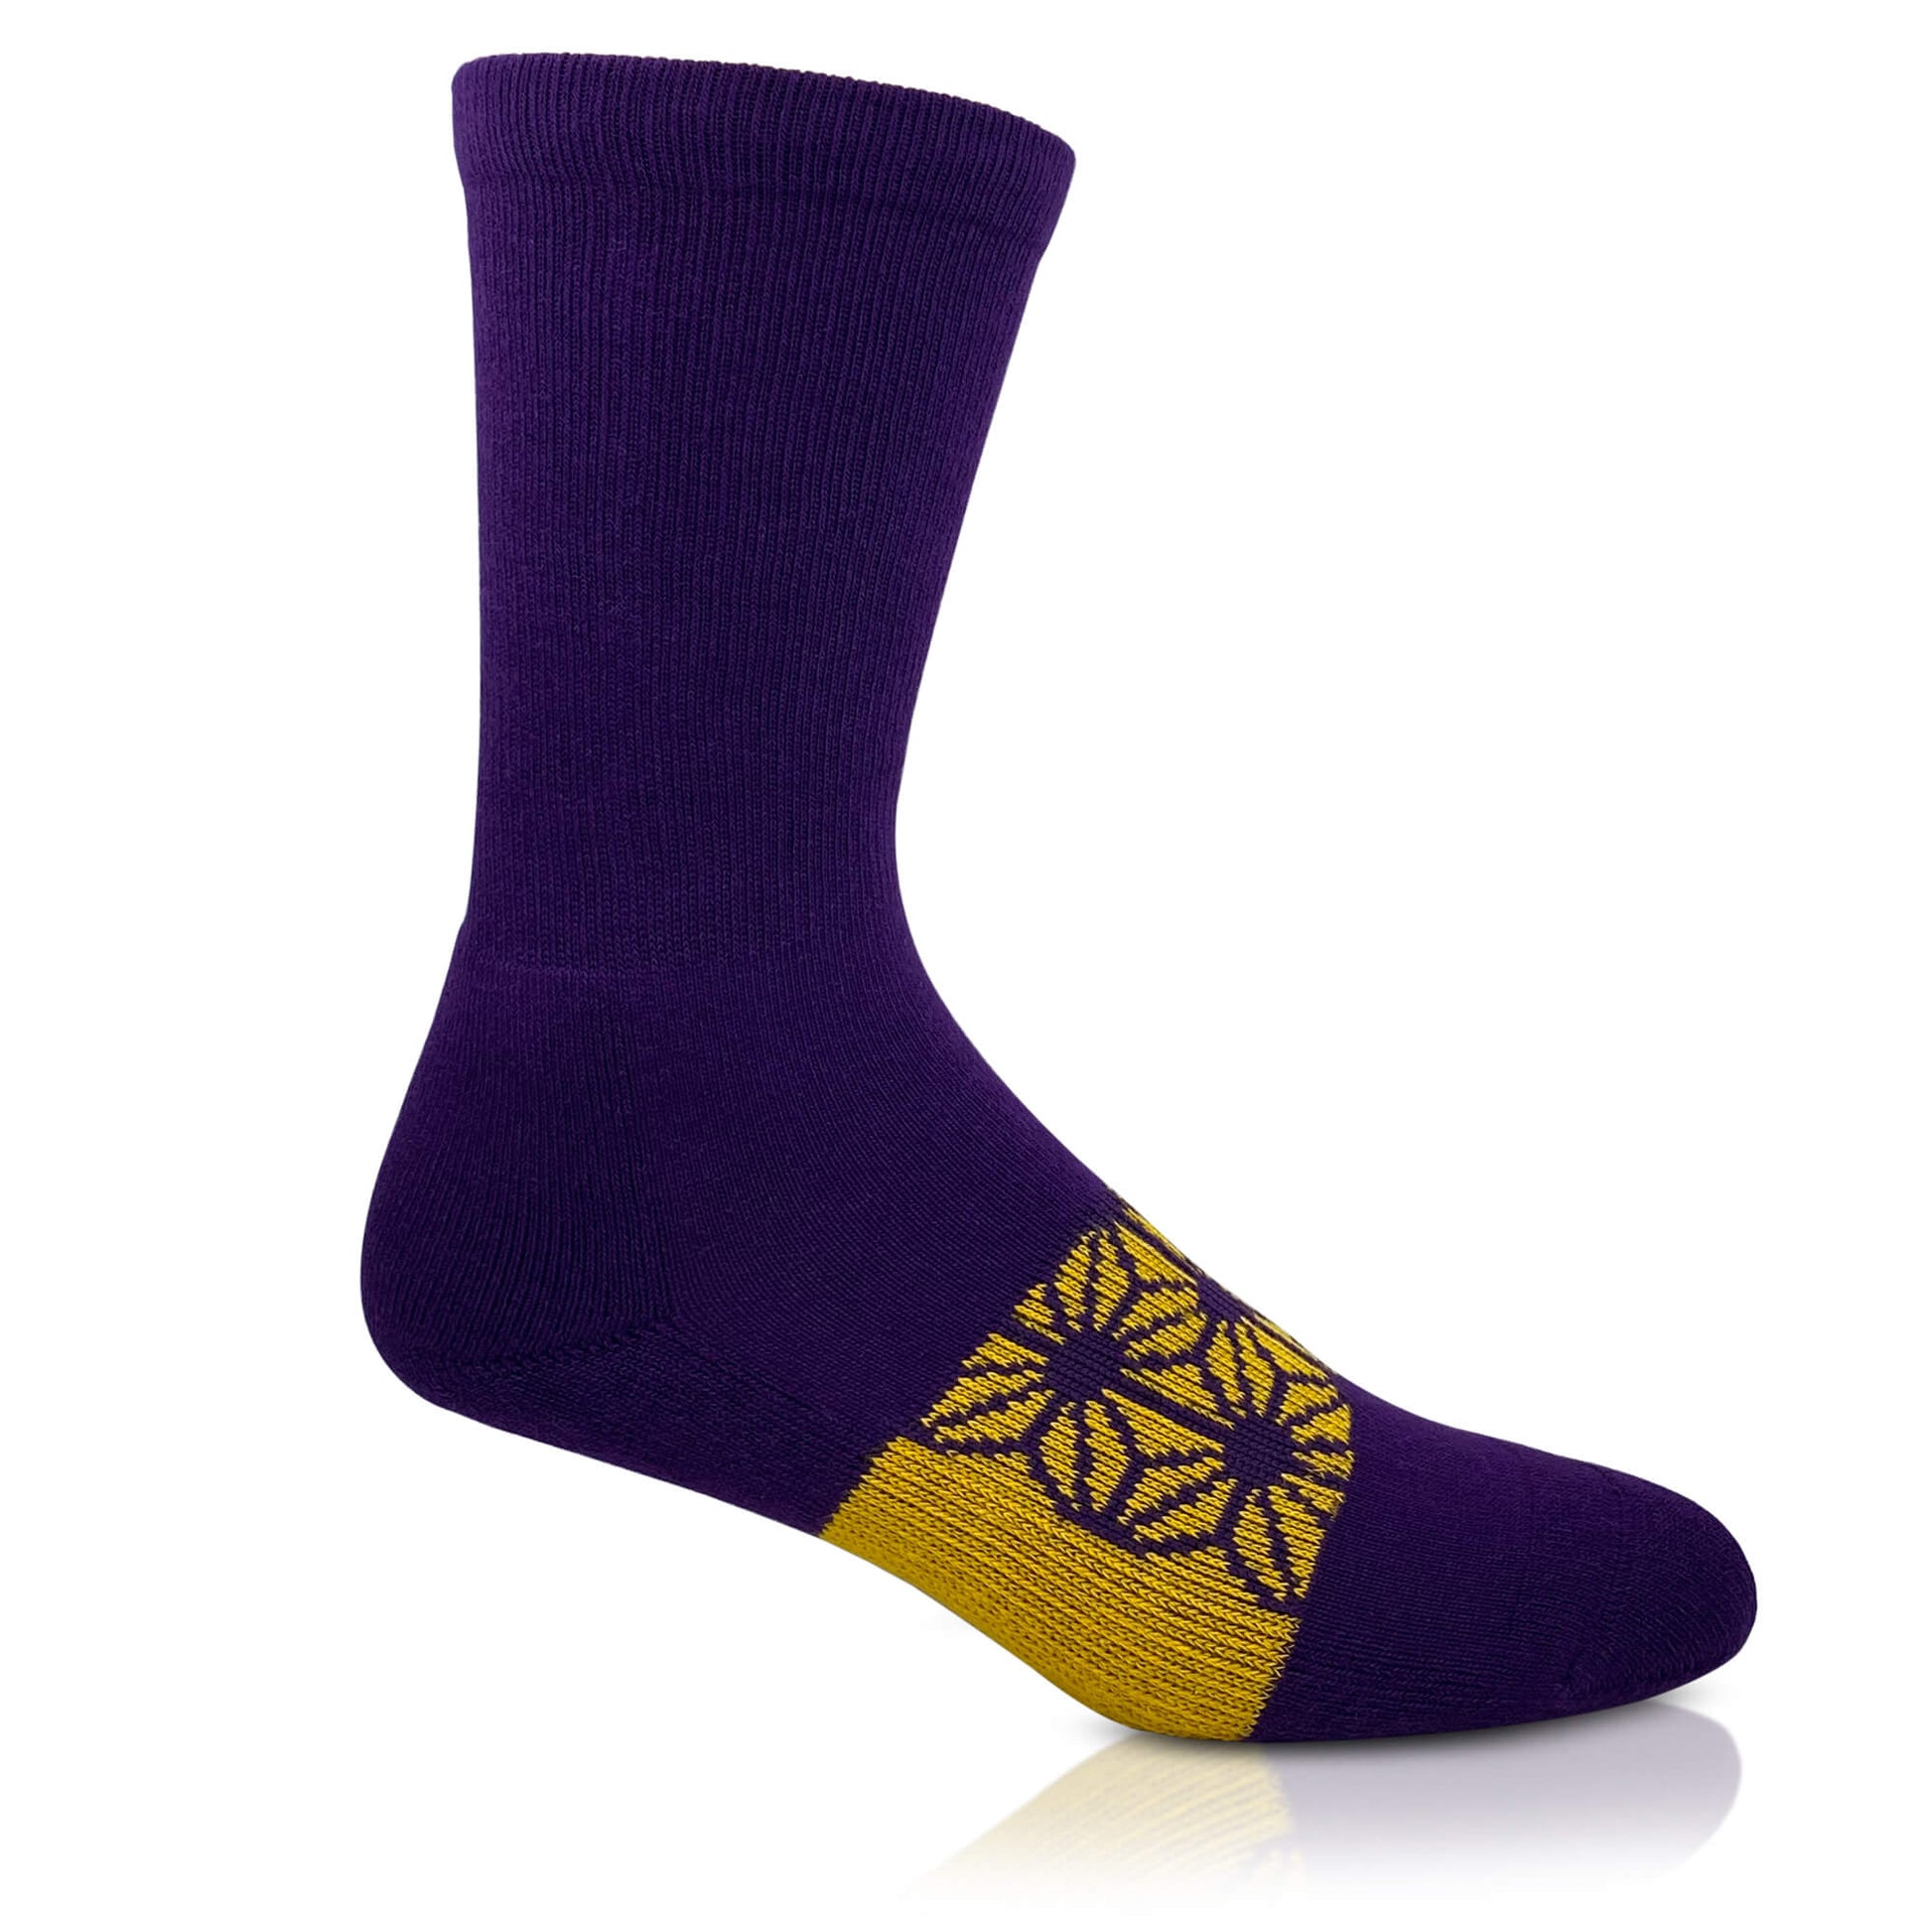 Modern Envy comfy crew socks Purple and Gold side view